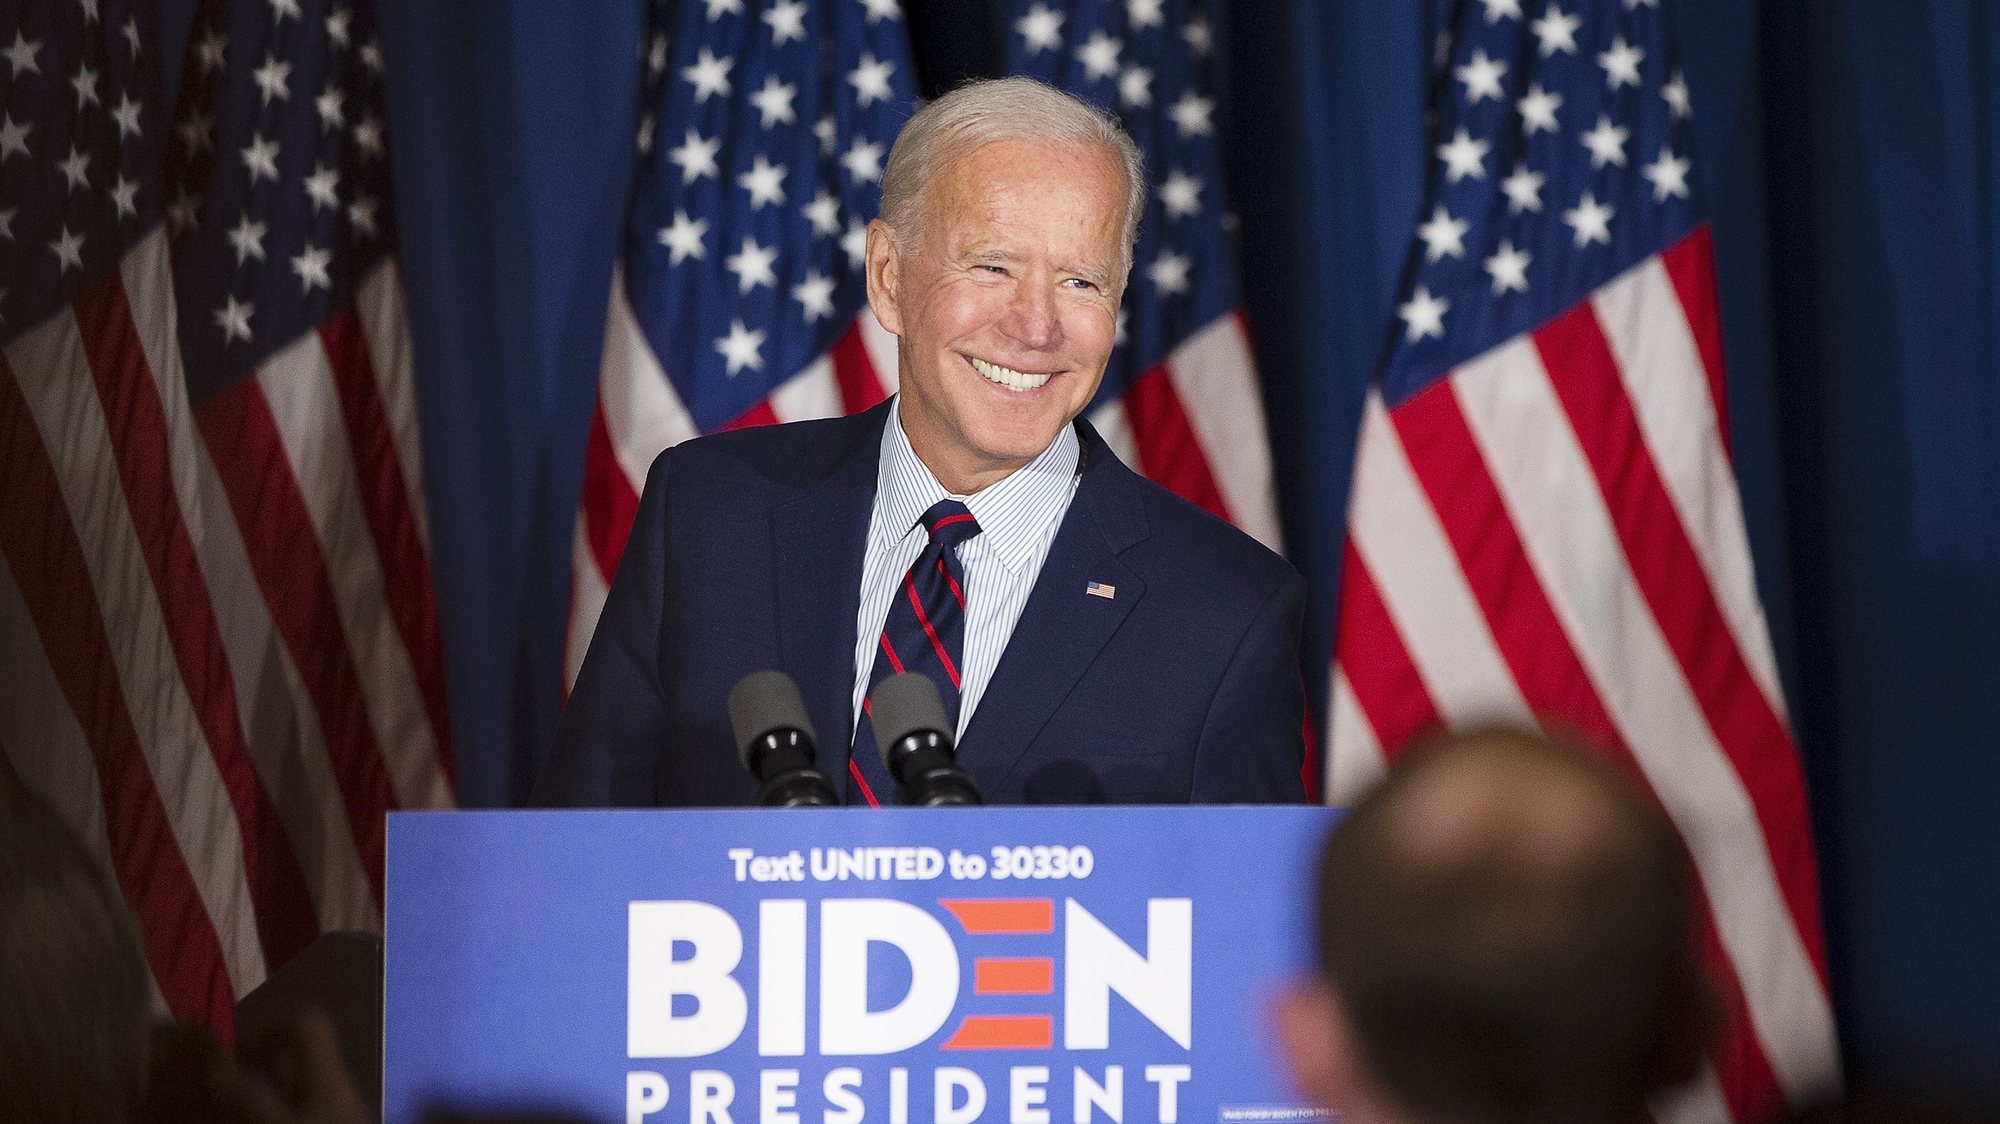 epa08802769 (FILE) - Democratic candidate for United States President, Former Vice President Joe Biden, smiles as he prepares to make a speech during a campaign stop at the Governor&#039;s Inn in Rochester, New Hampshire, USA, 09 October 2019 (reissued 06 November 2020). According to media reports citing election officials, Biden has taken the lead in Pennsylvania. An official win of the state would push Biden over the 270 electoral votes necessary to become the 46th President of the United States. *** Local Caption *** 55537332  EPA/CJ GUNTHER *** Local Caption *** 55537332